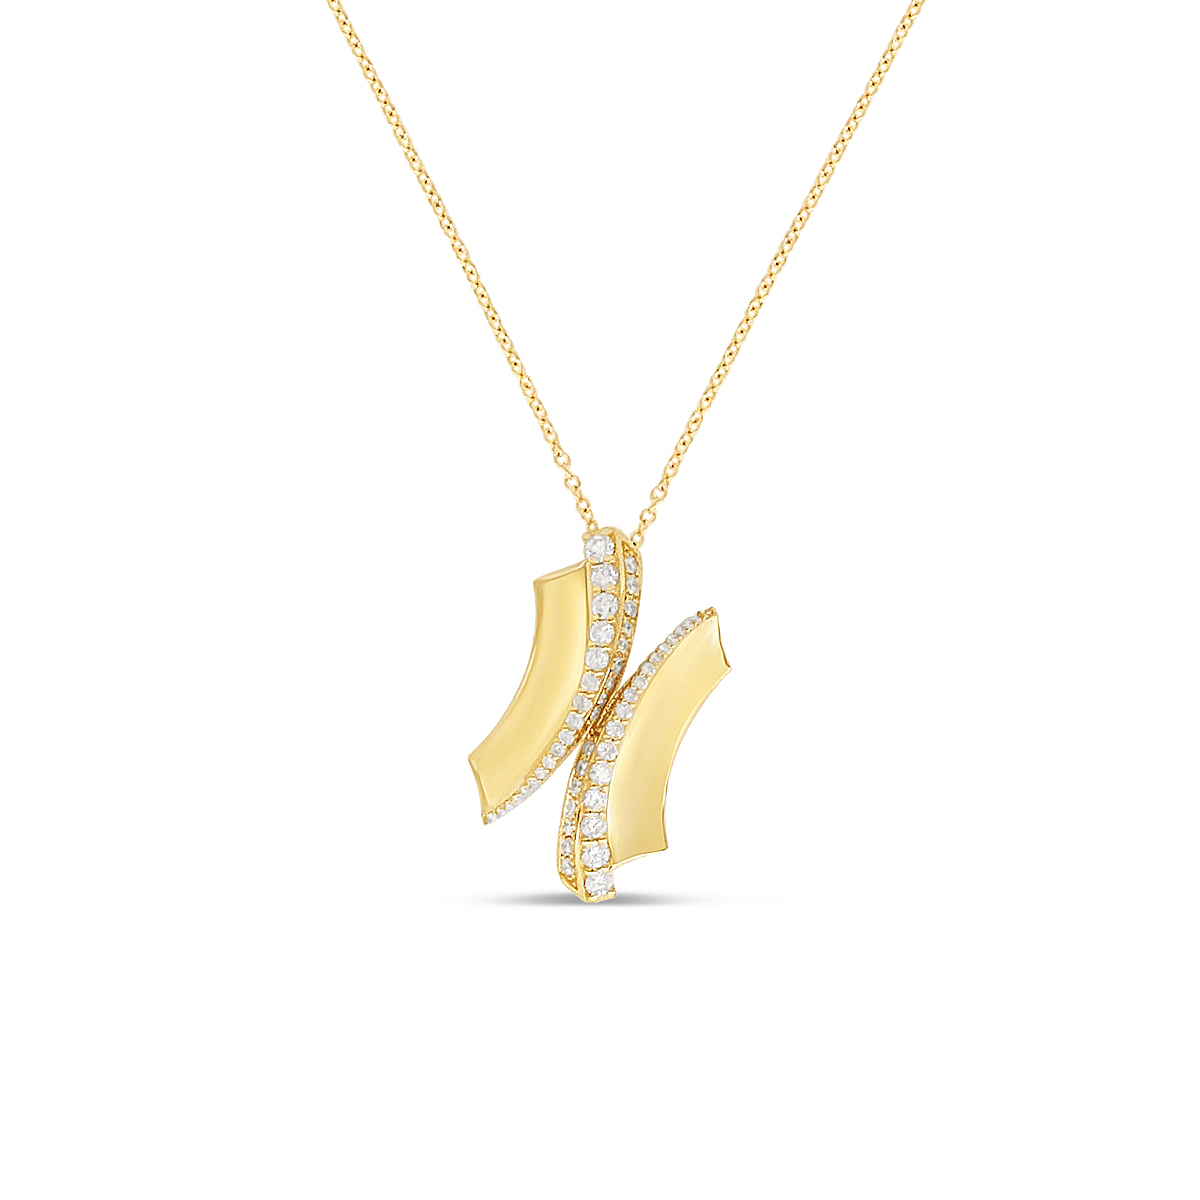 Abstract Italian Pendant Necklace with White Diamonds (18K Yellow Gold) - 